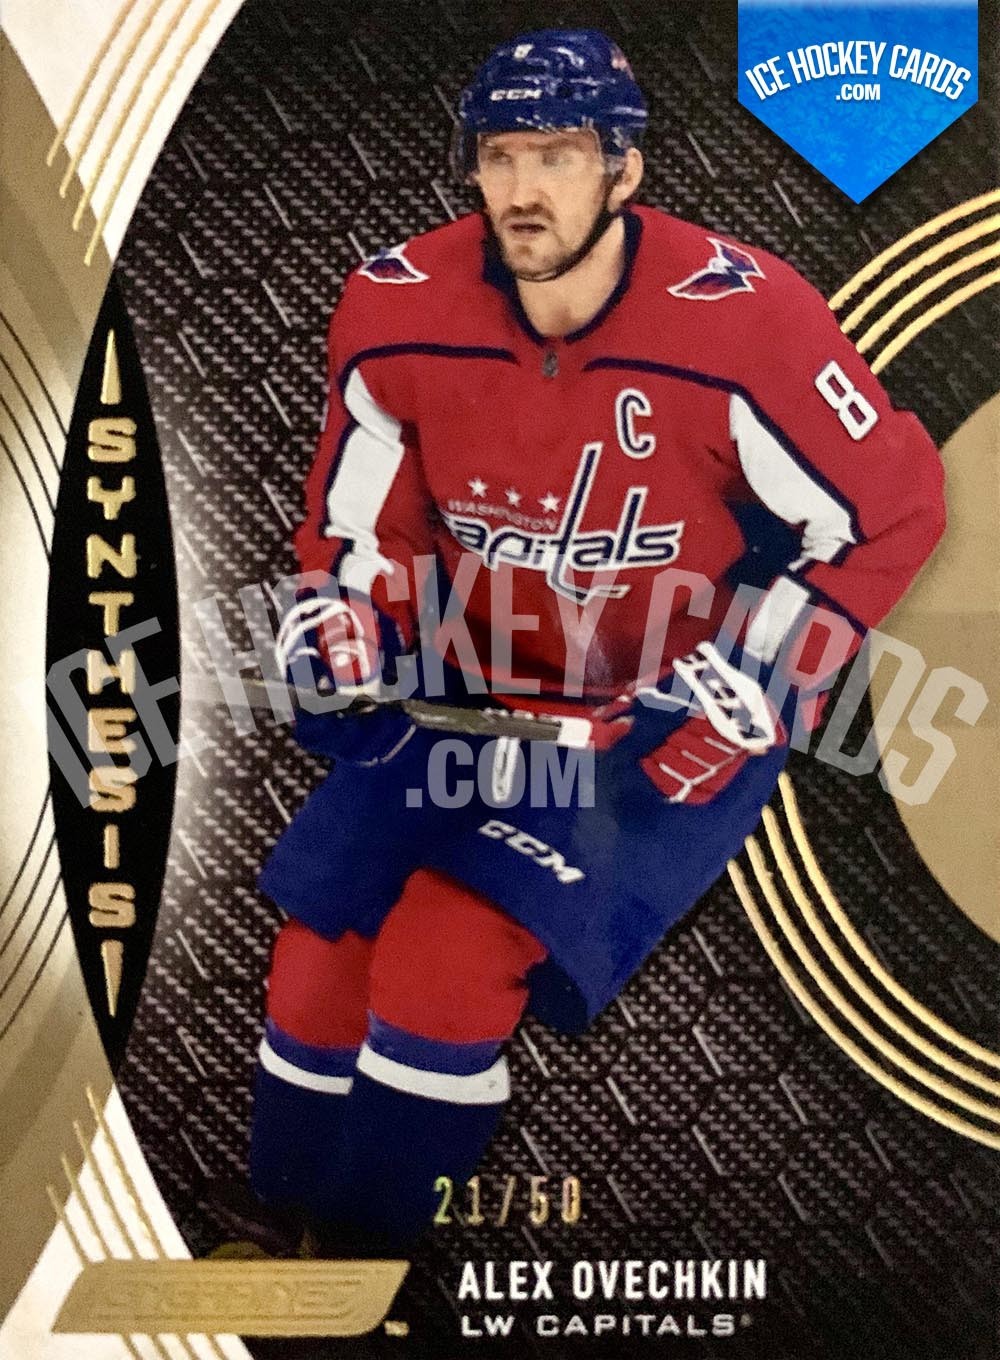 Upper Deck - Engrained 2018-19 - Alexander Ovechkin Synthesis Gold # to 50 RARE